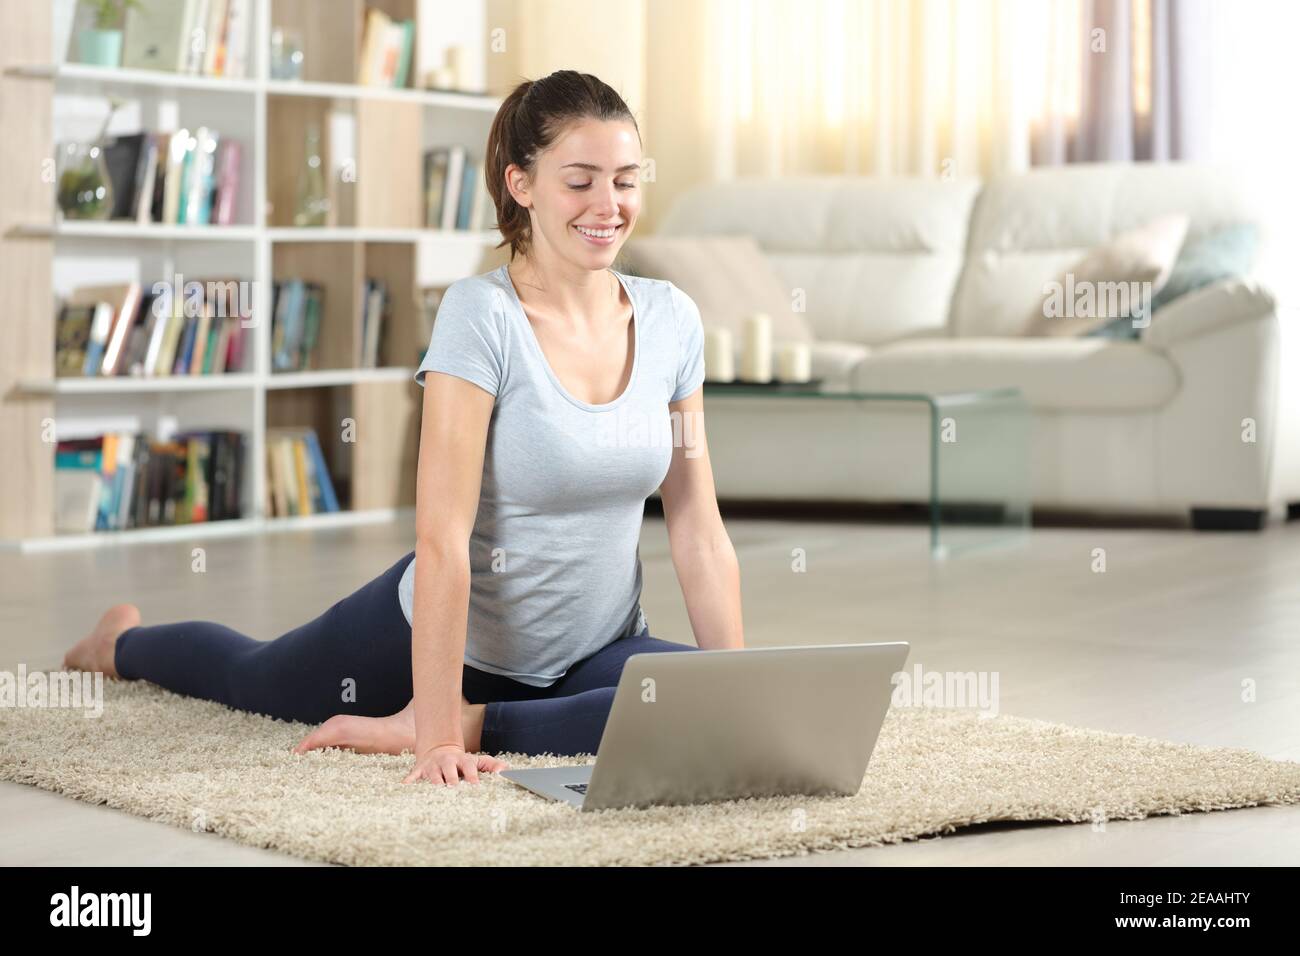 Happy woman e-learning online yoga tutorial on the floor at home Stock Photo